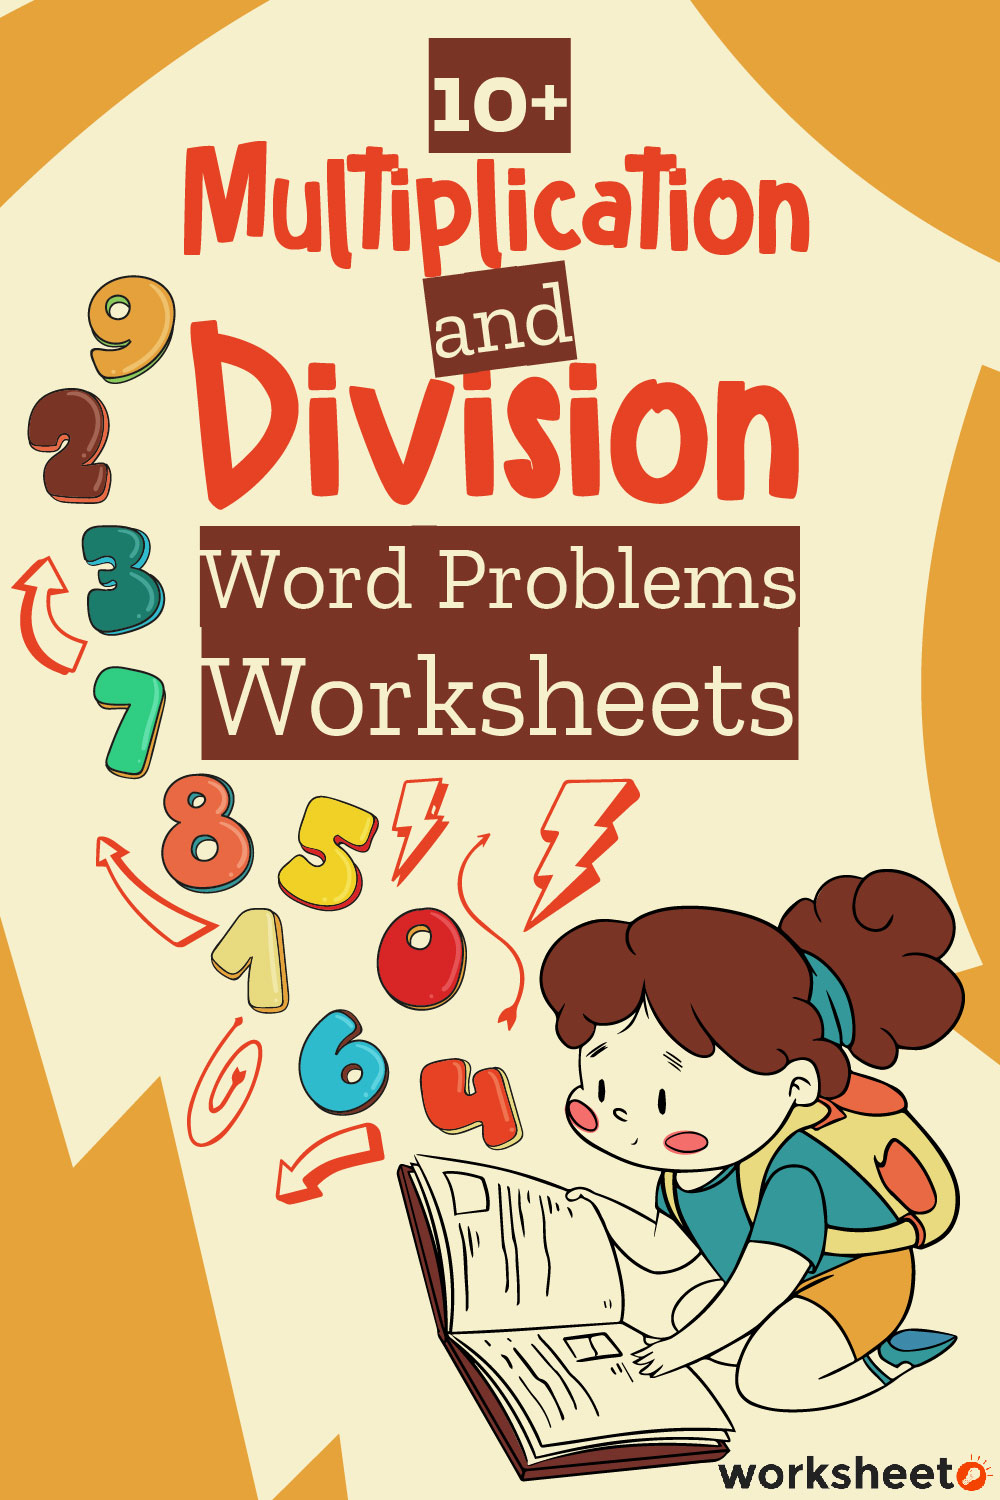 Multiplication and Division Word Problems Worksheets